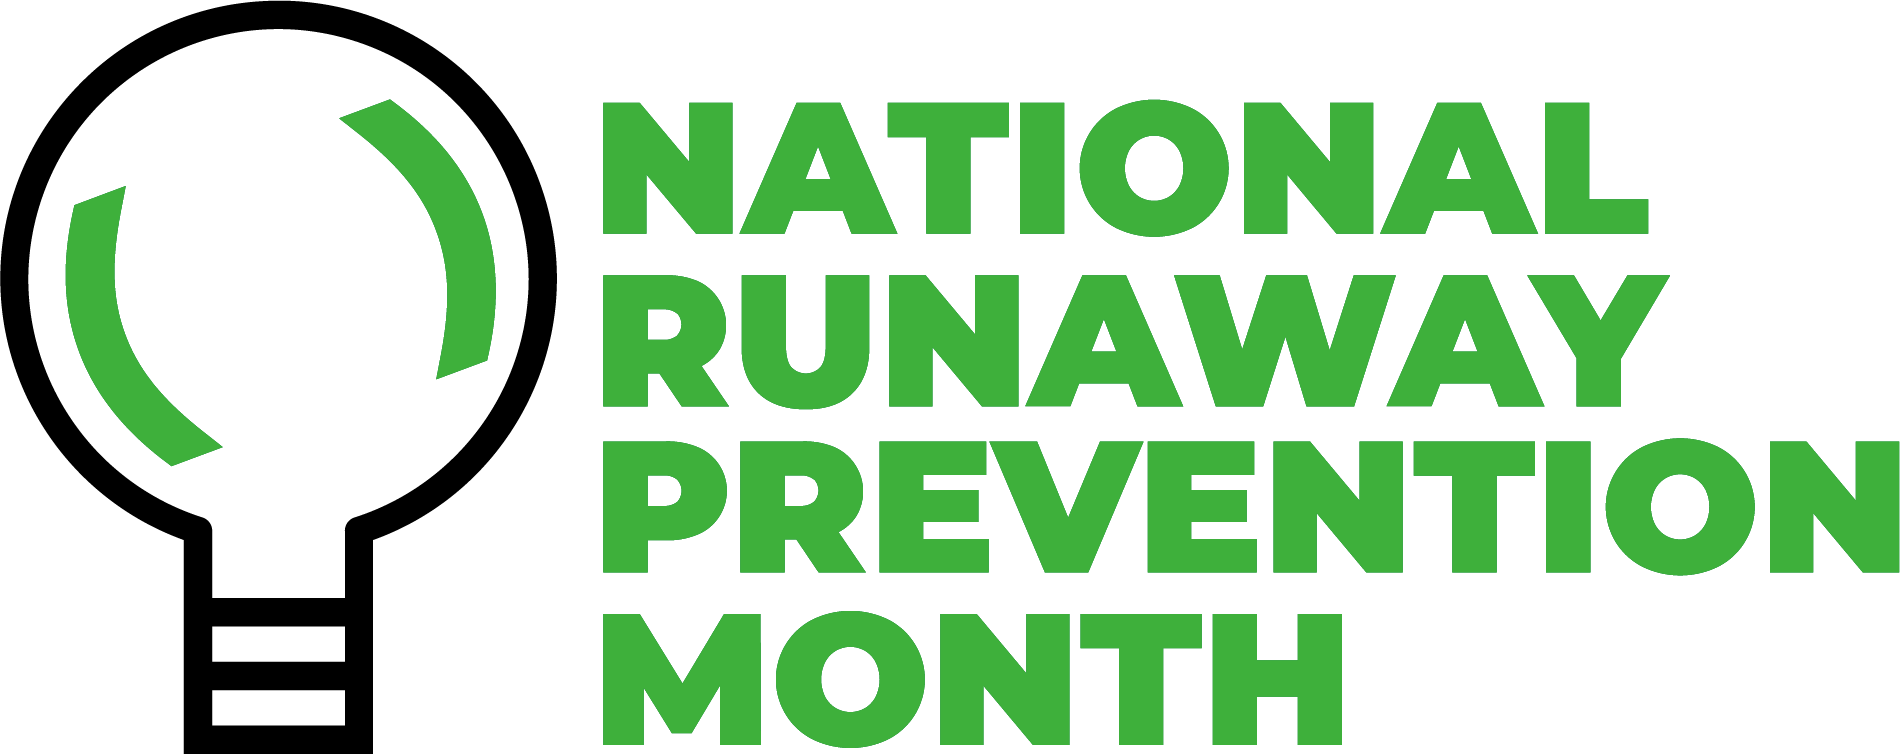 Black outline of ligthbulb with green marks to represent light. "National Runaway Prevention Month" in green text.